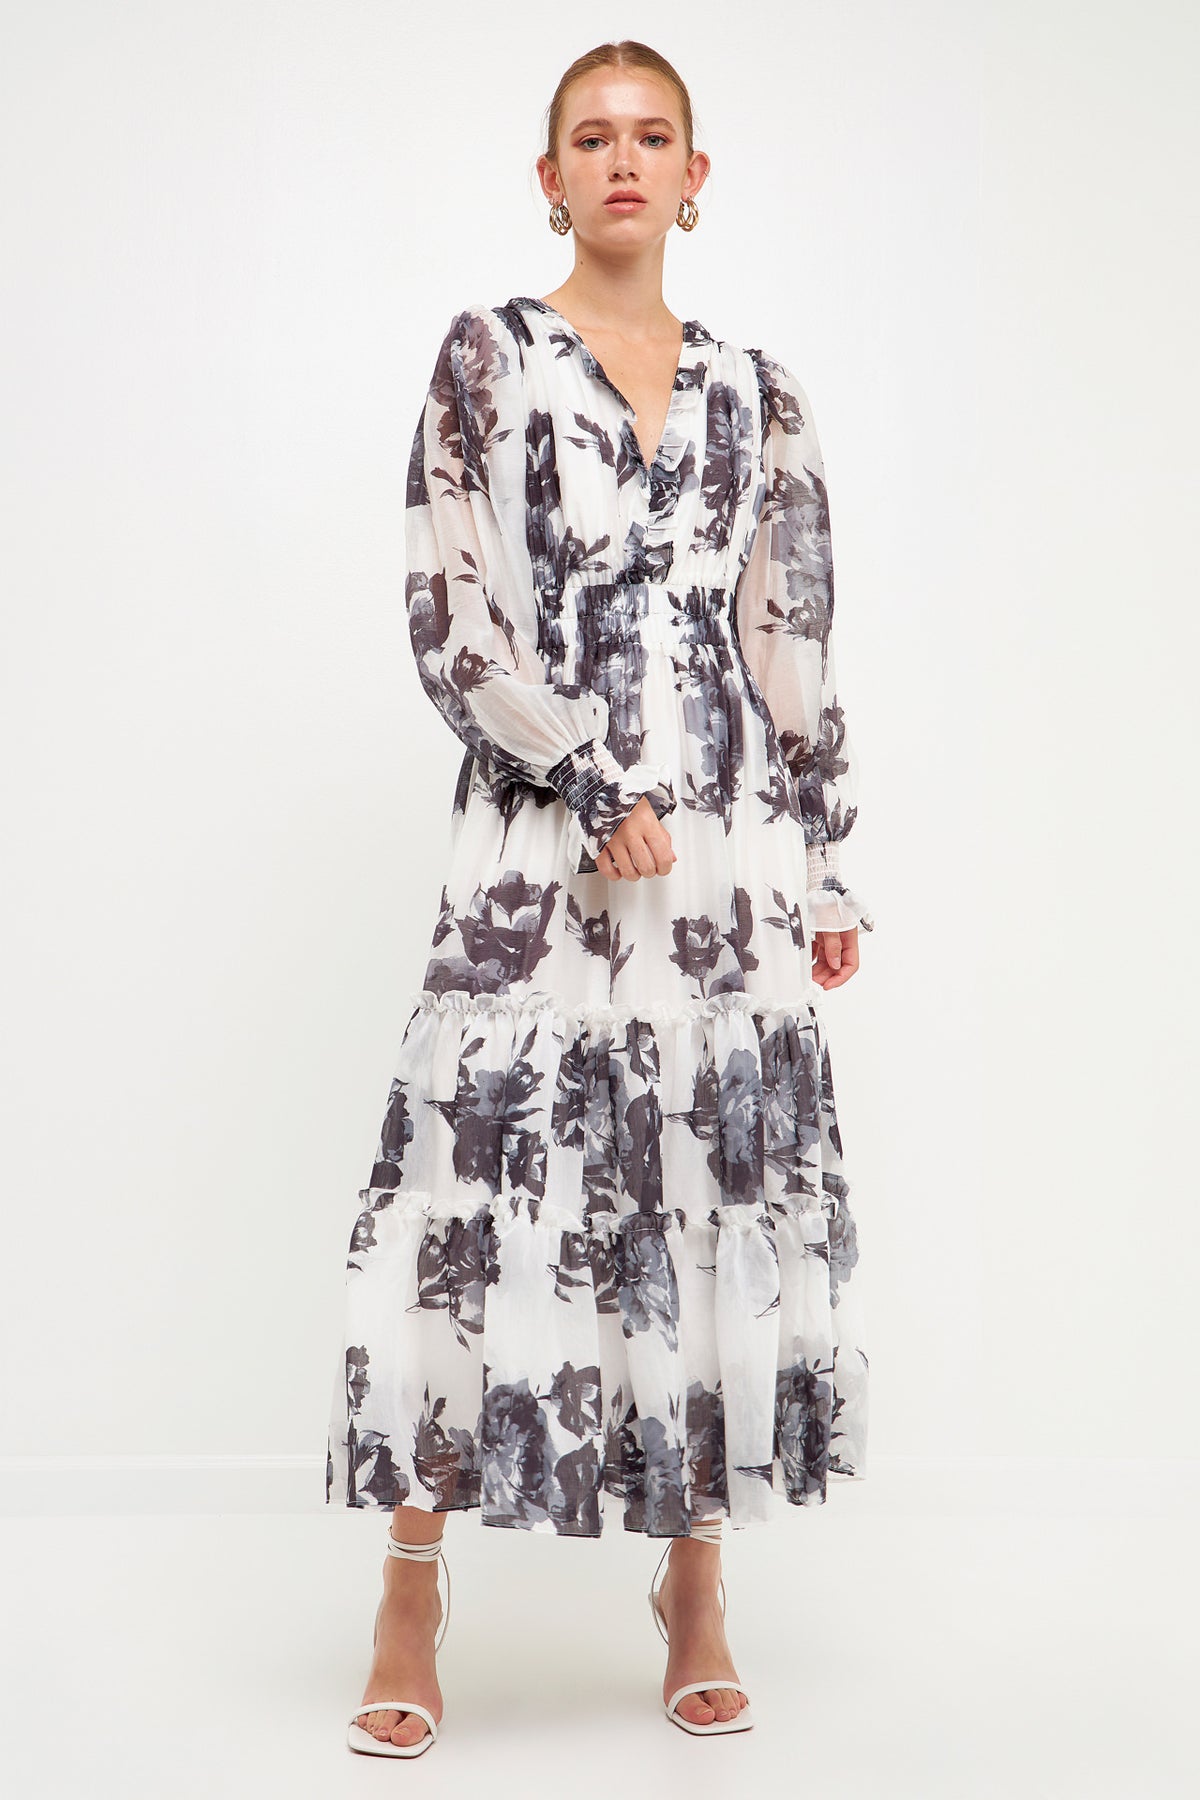 ENDLESS ROSE - Floral Print Midi Dress - DRESSES available at Objectrare